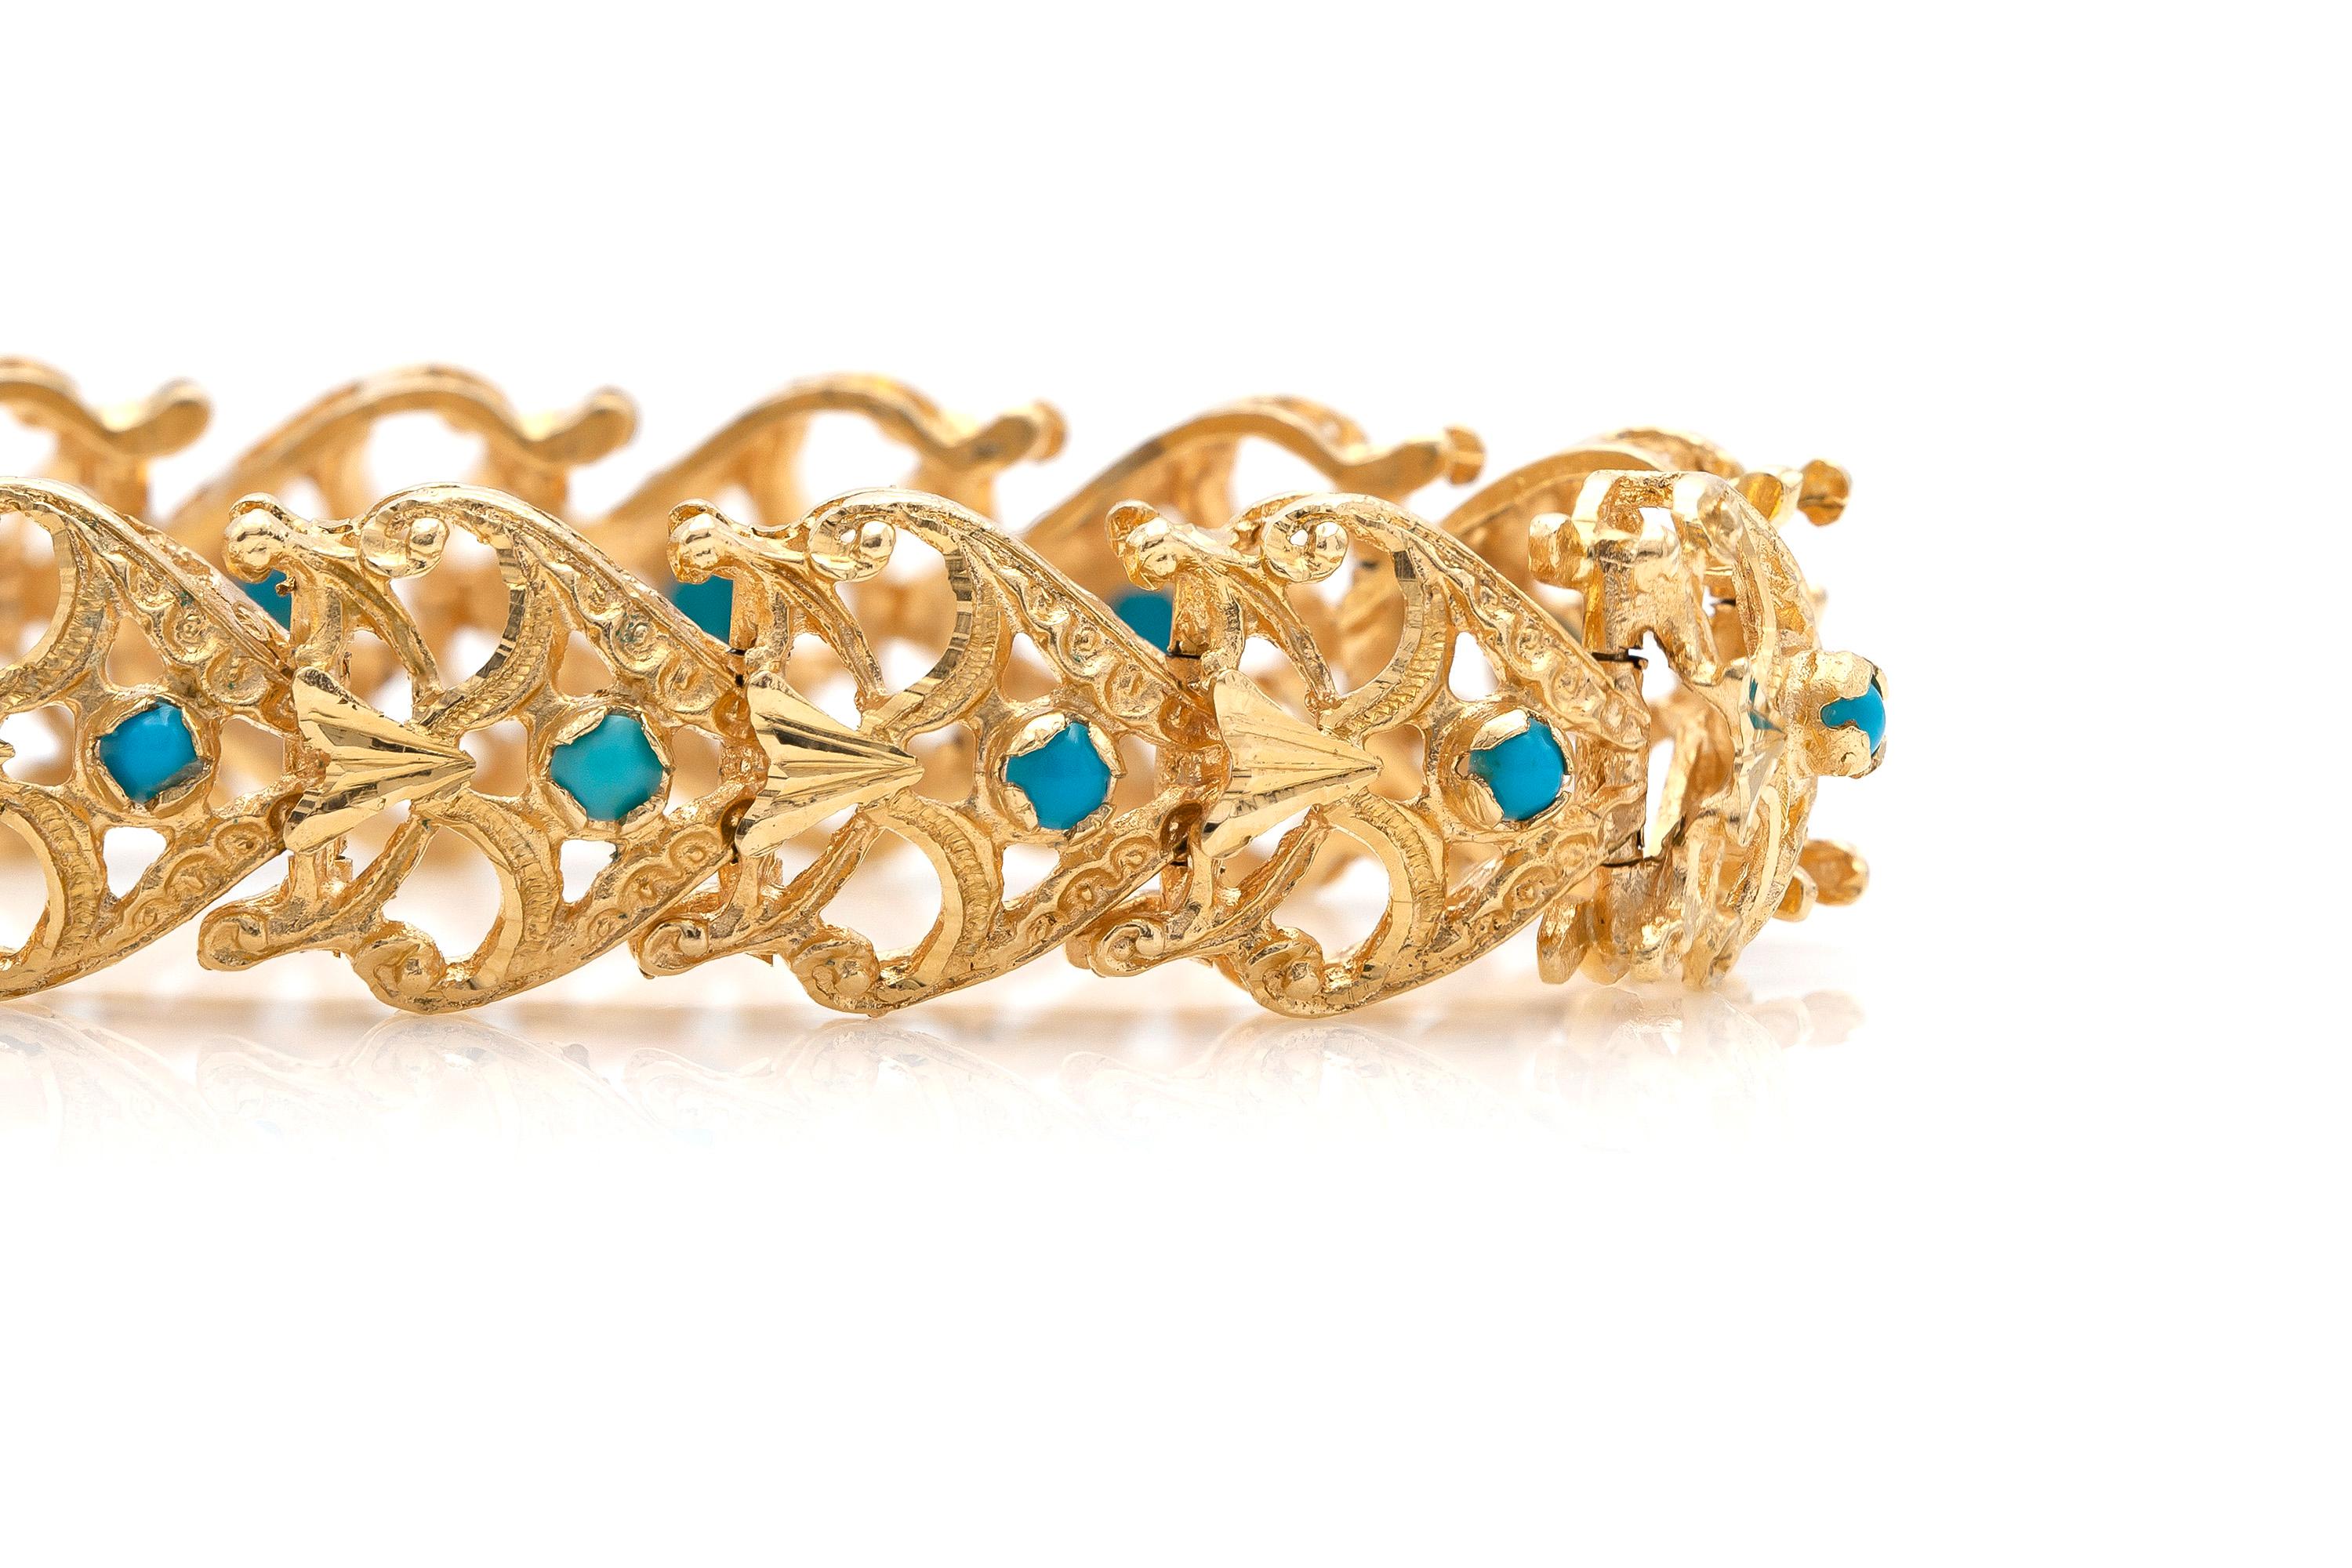 Finely crafted in 18K yellow gold featuring turquoise beads. 